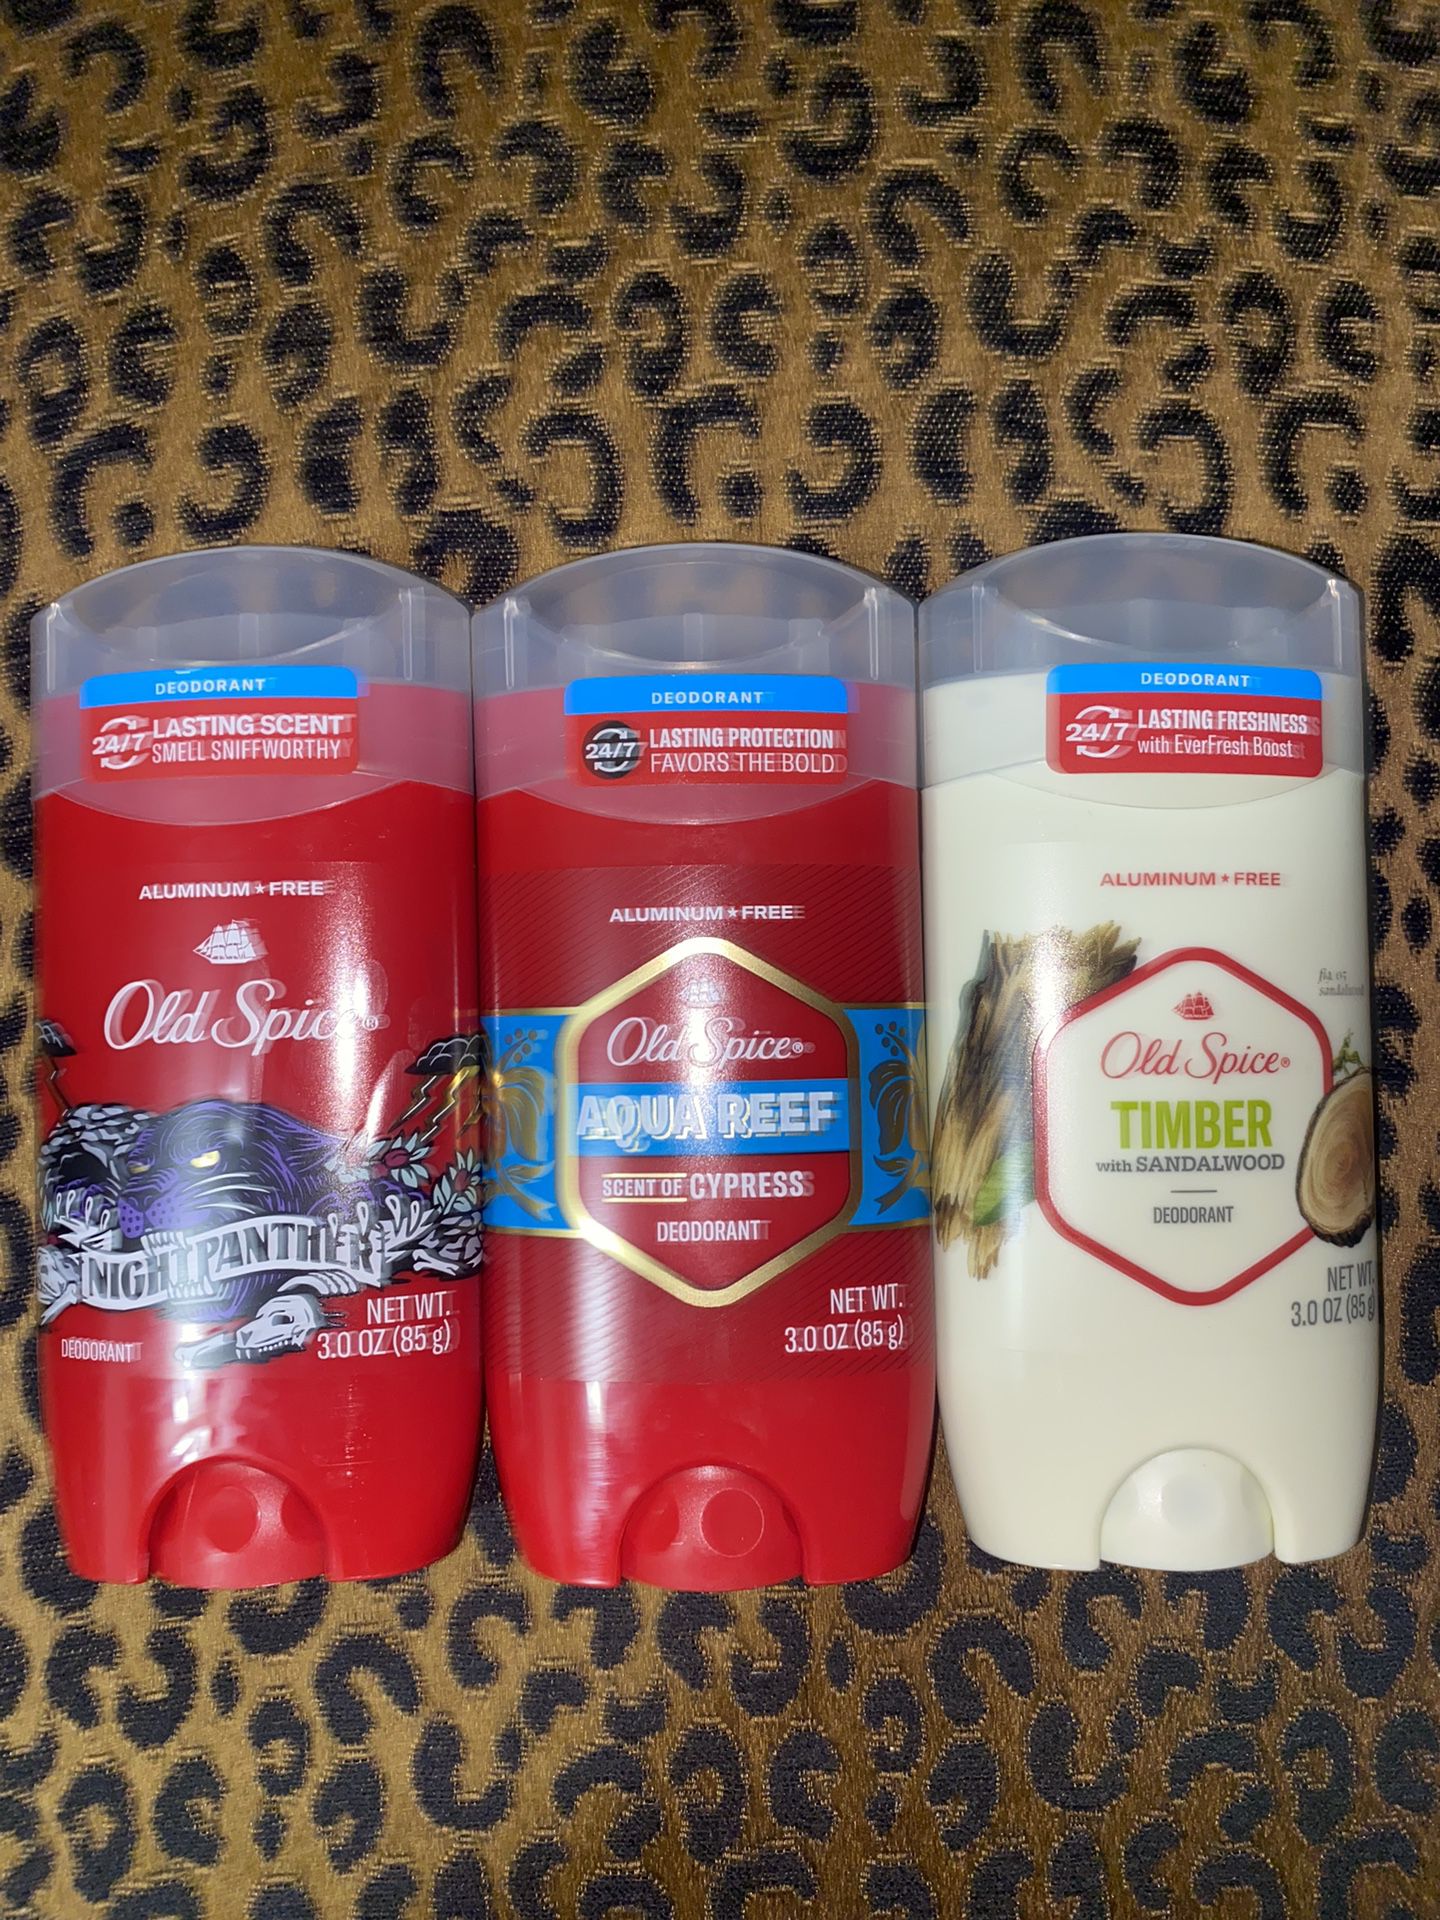 3🔥3.0 Oz Old Spice Men Deodorant All 3 For $15 Firm On Price